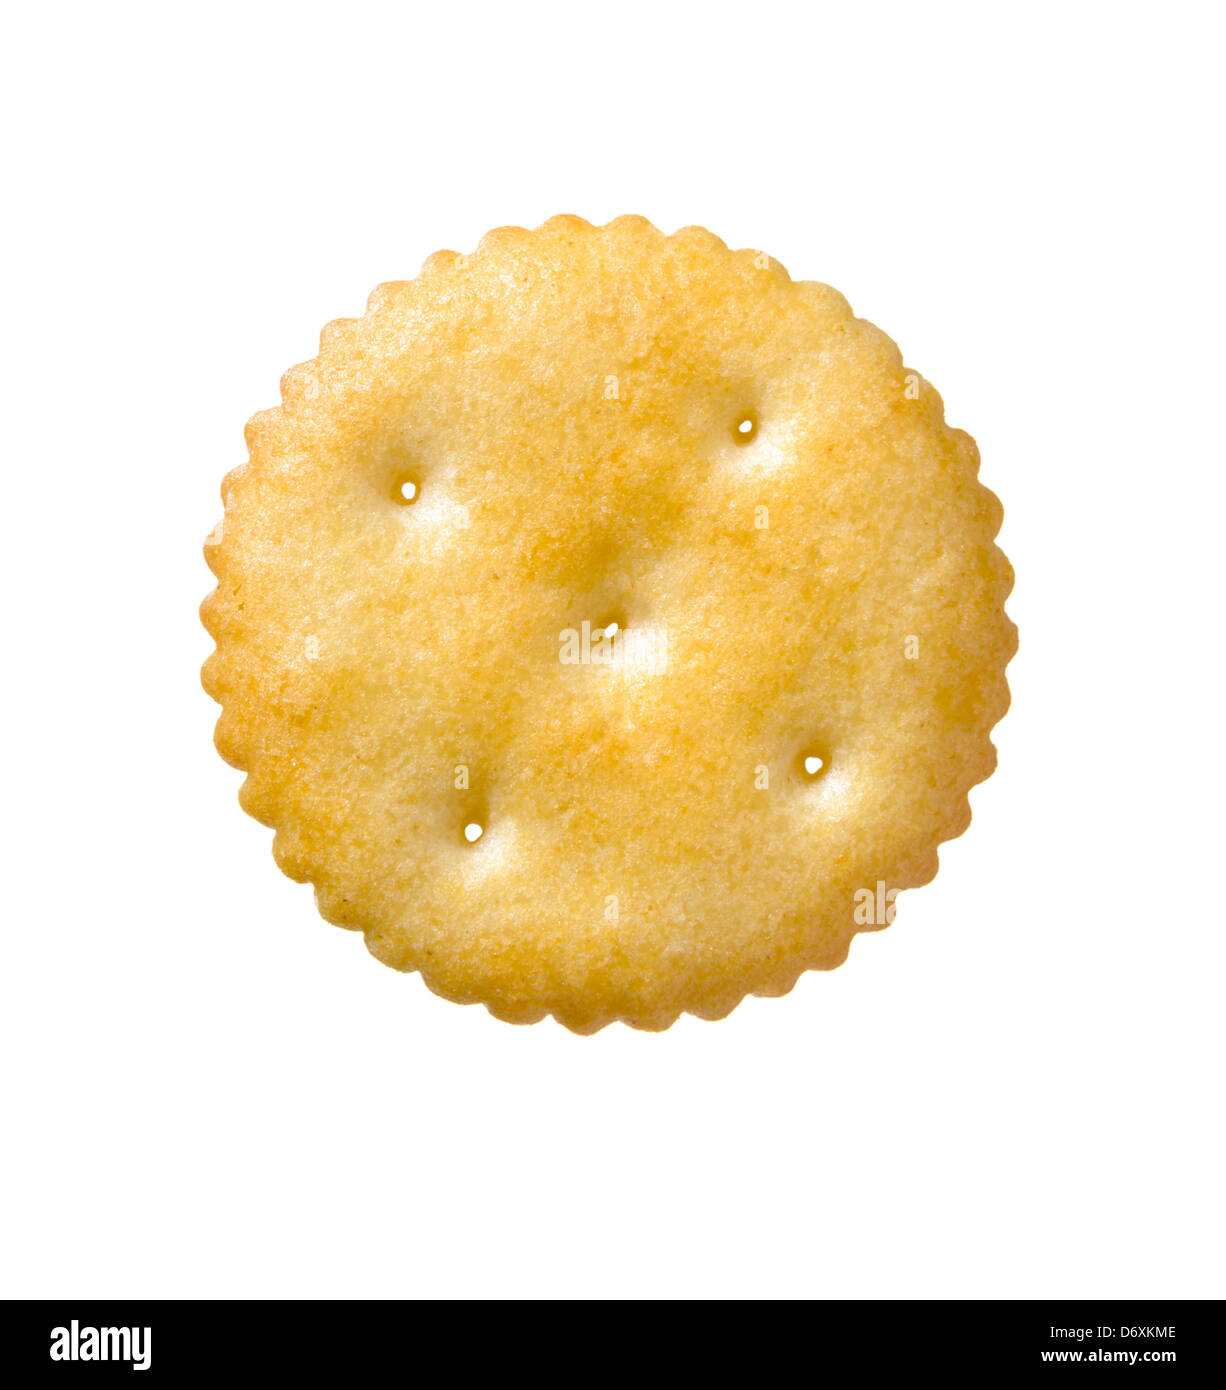 Salty snack, circular cracker, front side Stock Photo